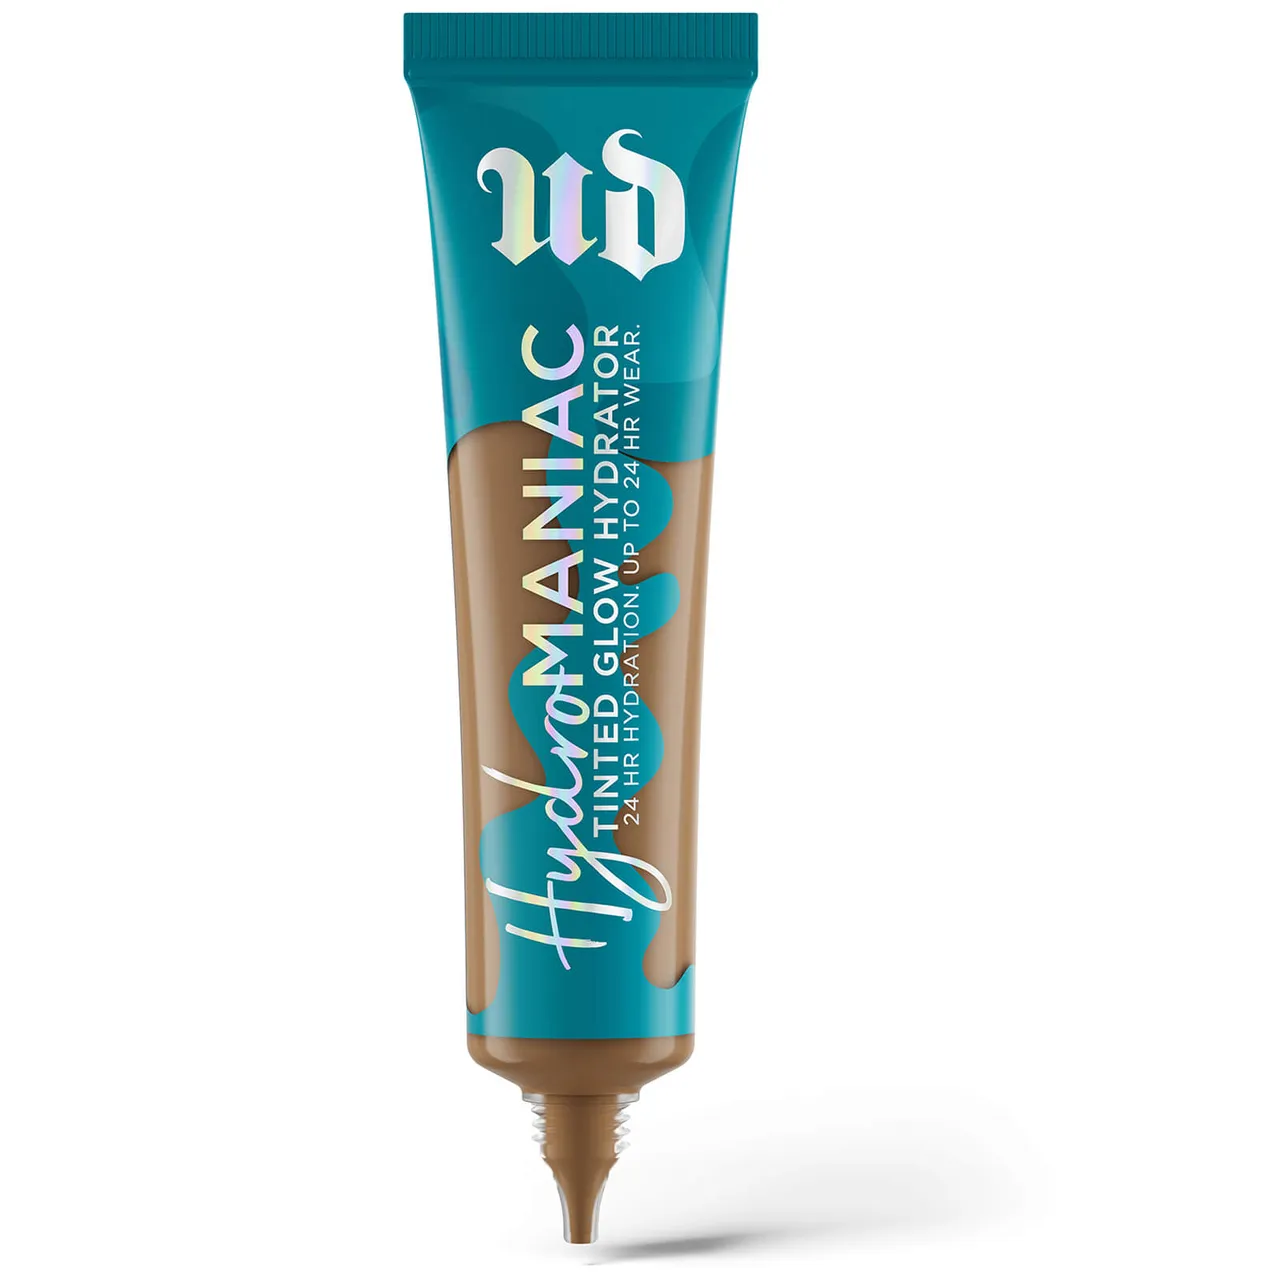 Urban Decay Stay Naked Hydromaniac Tinted Glow Hydrator 35ml (Various Shades) - 55